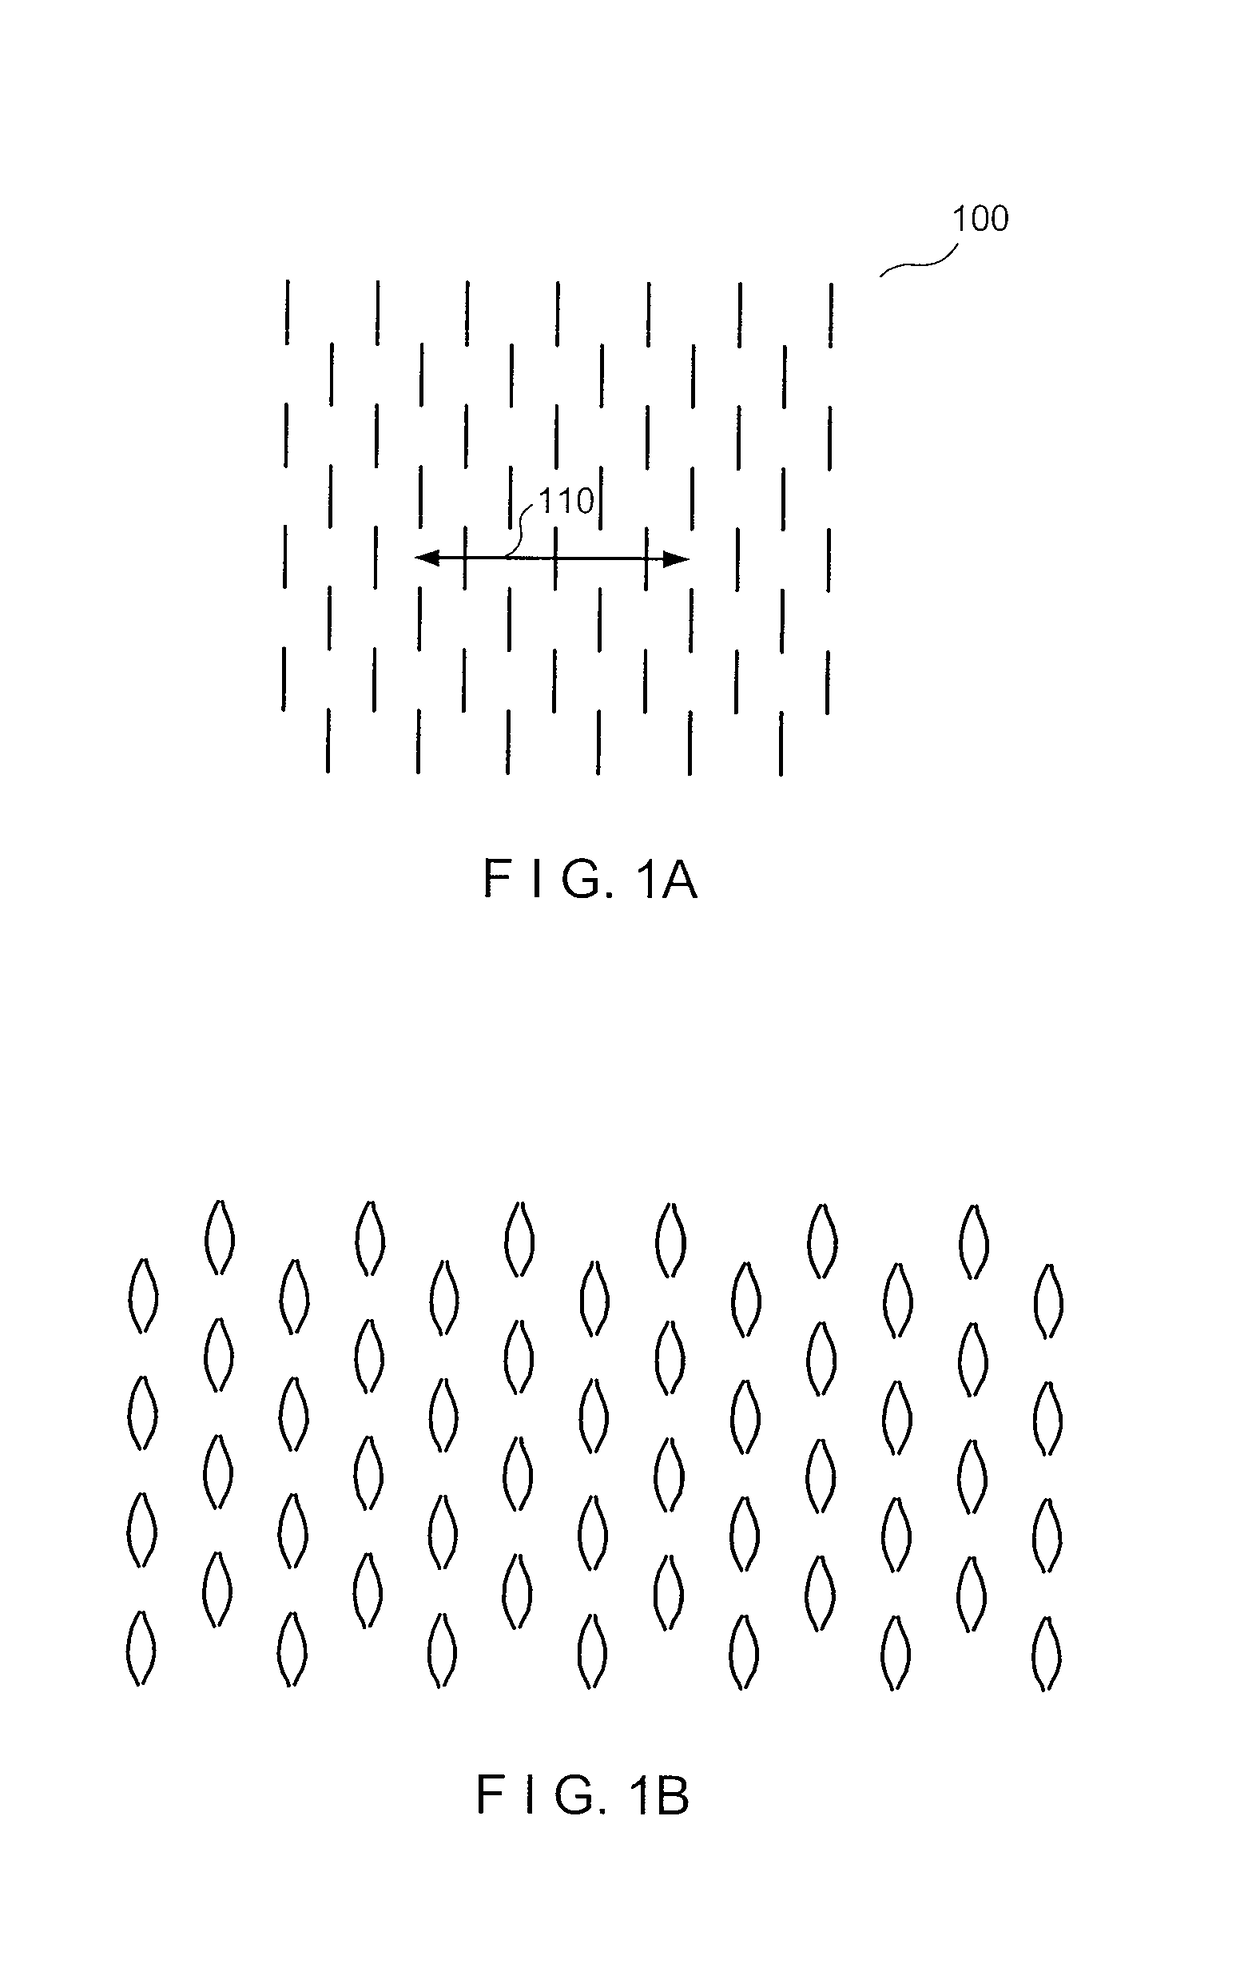 Method and Apparatus for Tissue Expansion